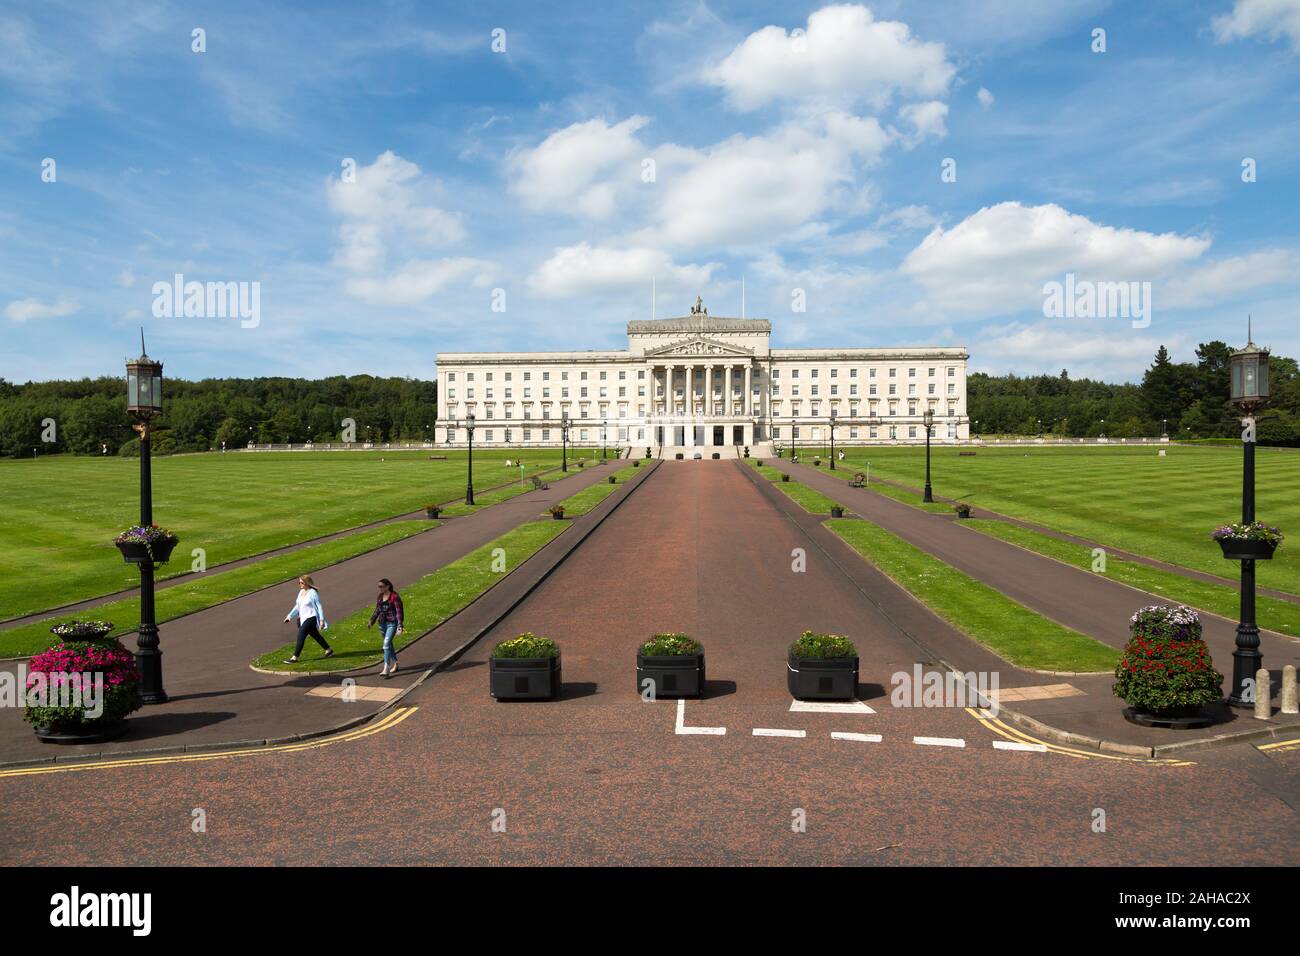 15.07.2019, Belfast, Northern Ireland, Great Britain - Stormont Castle, seat of the Northern Ireland Assembly and government of Northern Ireland, when Stock Photo